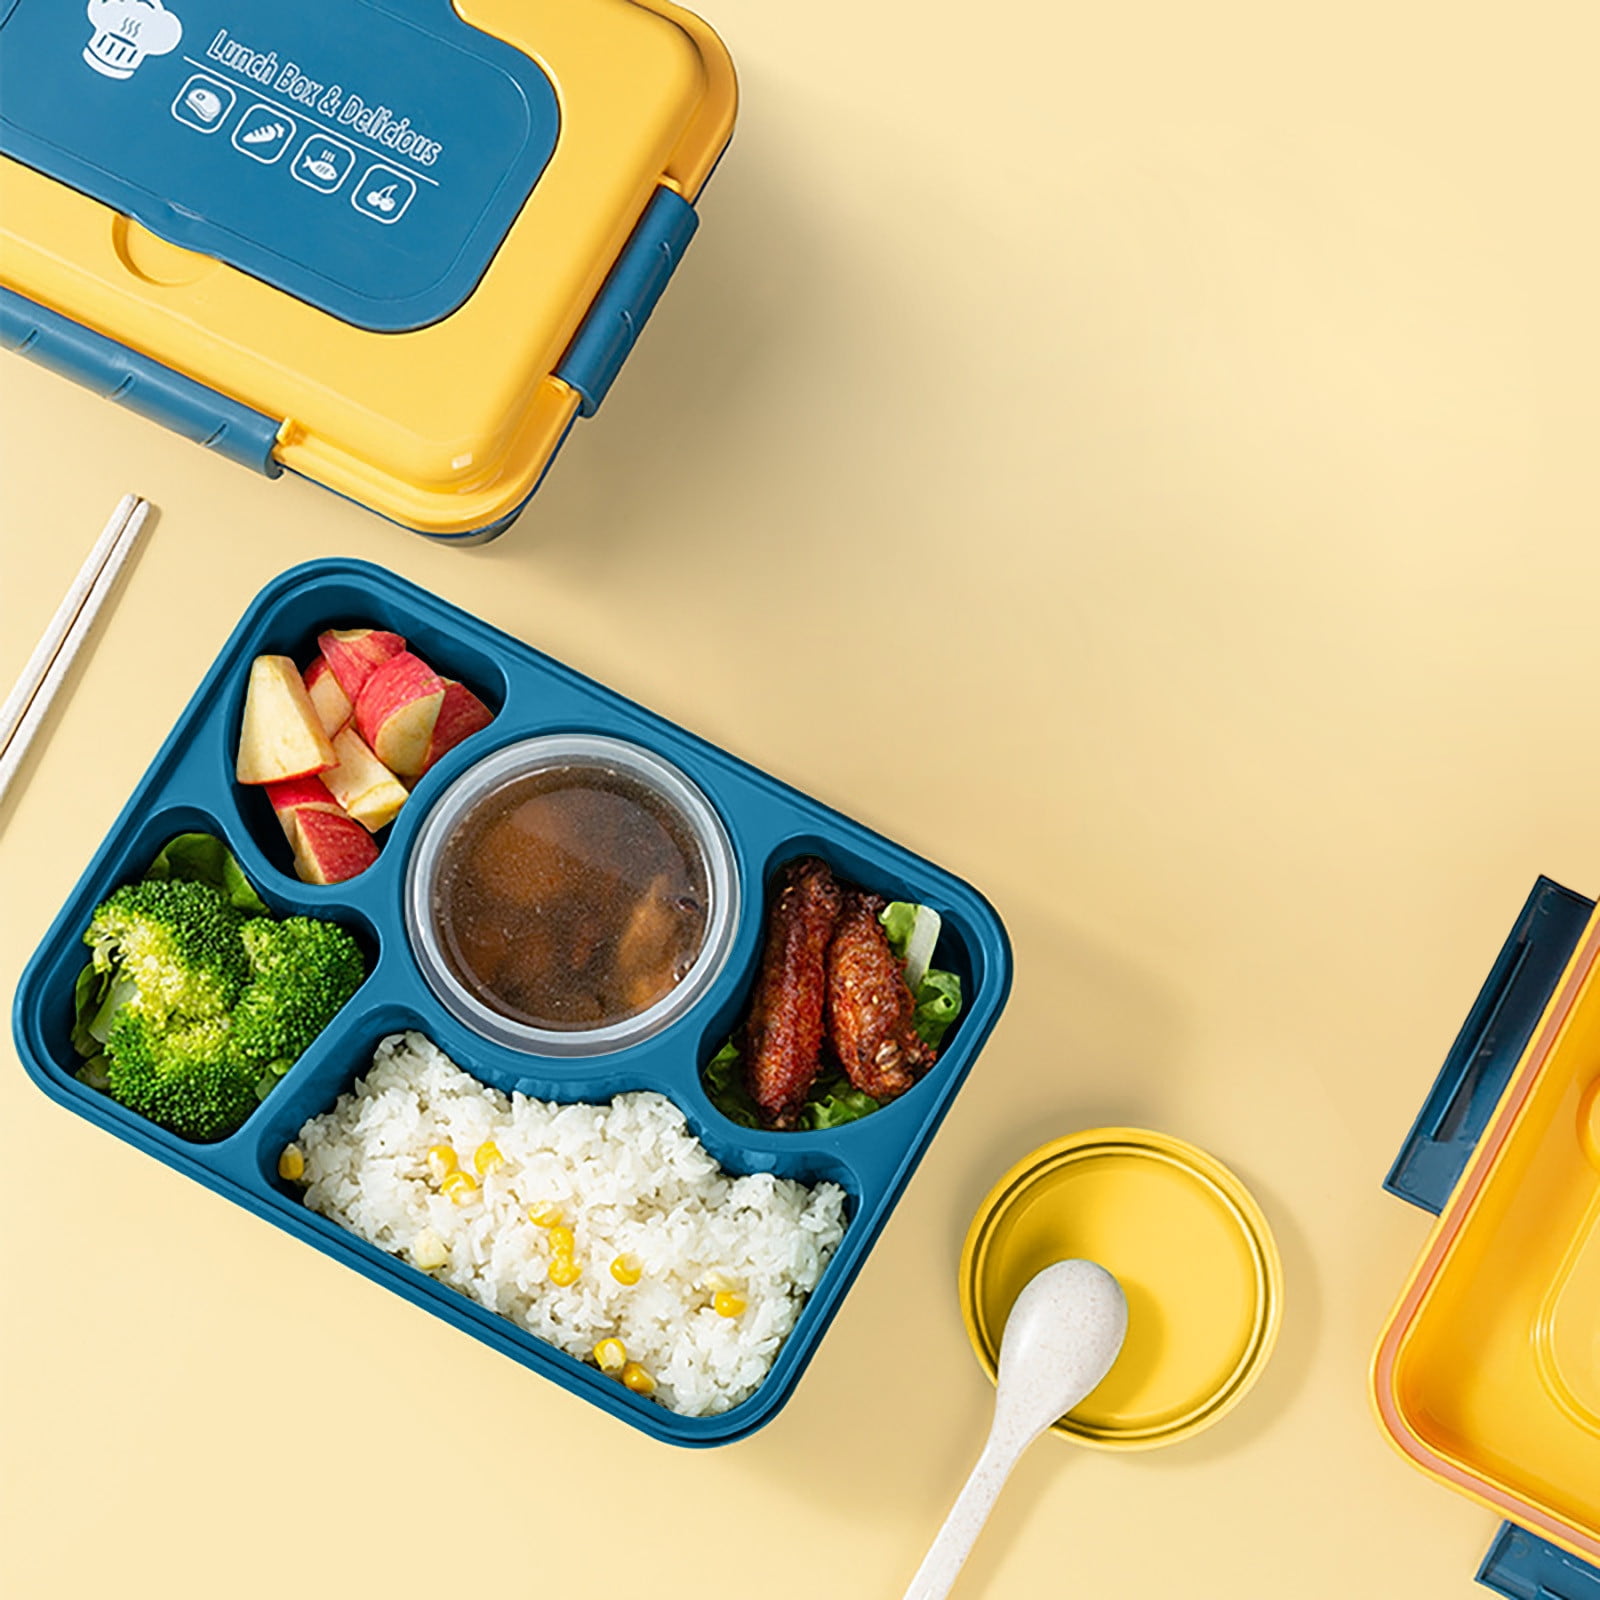 Tagold Lunch Box Kids,Bento Box Adult Lunch Box,Lunch Containers for Adults/Kids/Toddler,1600ML-5 Compartment Bento Lunch Box,Built-In Reusable Spoon